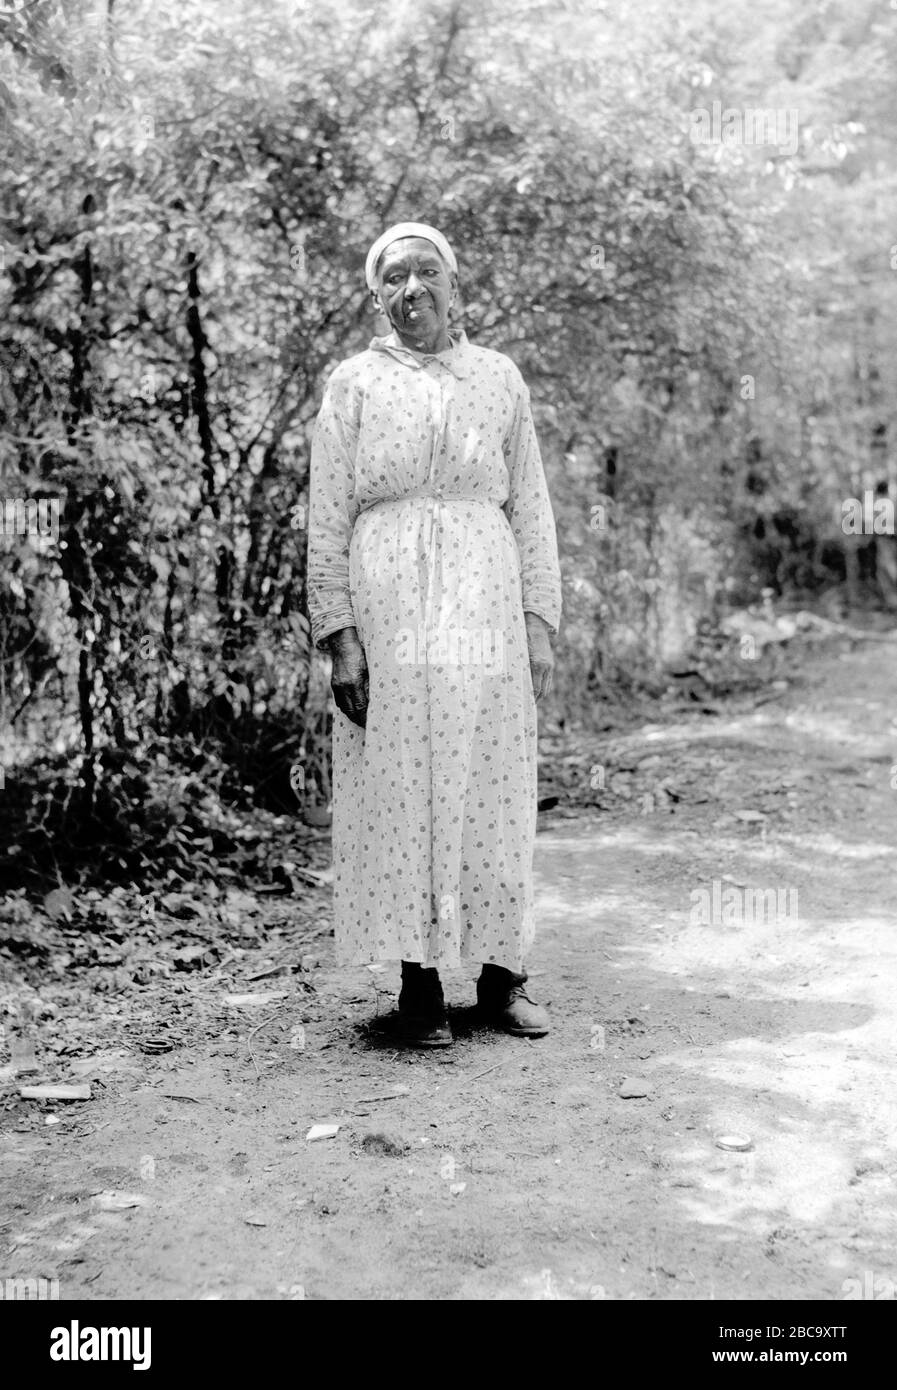 Josephine Hill, ex-Slave, Full-Length Portrait, Alabama, USA, dal Federal Writer's Project, nato in schiavitù: Slave narraives, United States Work Projects Administration, 1937 Foto Stock